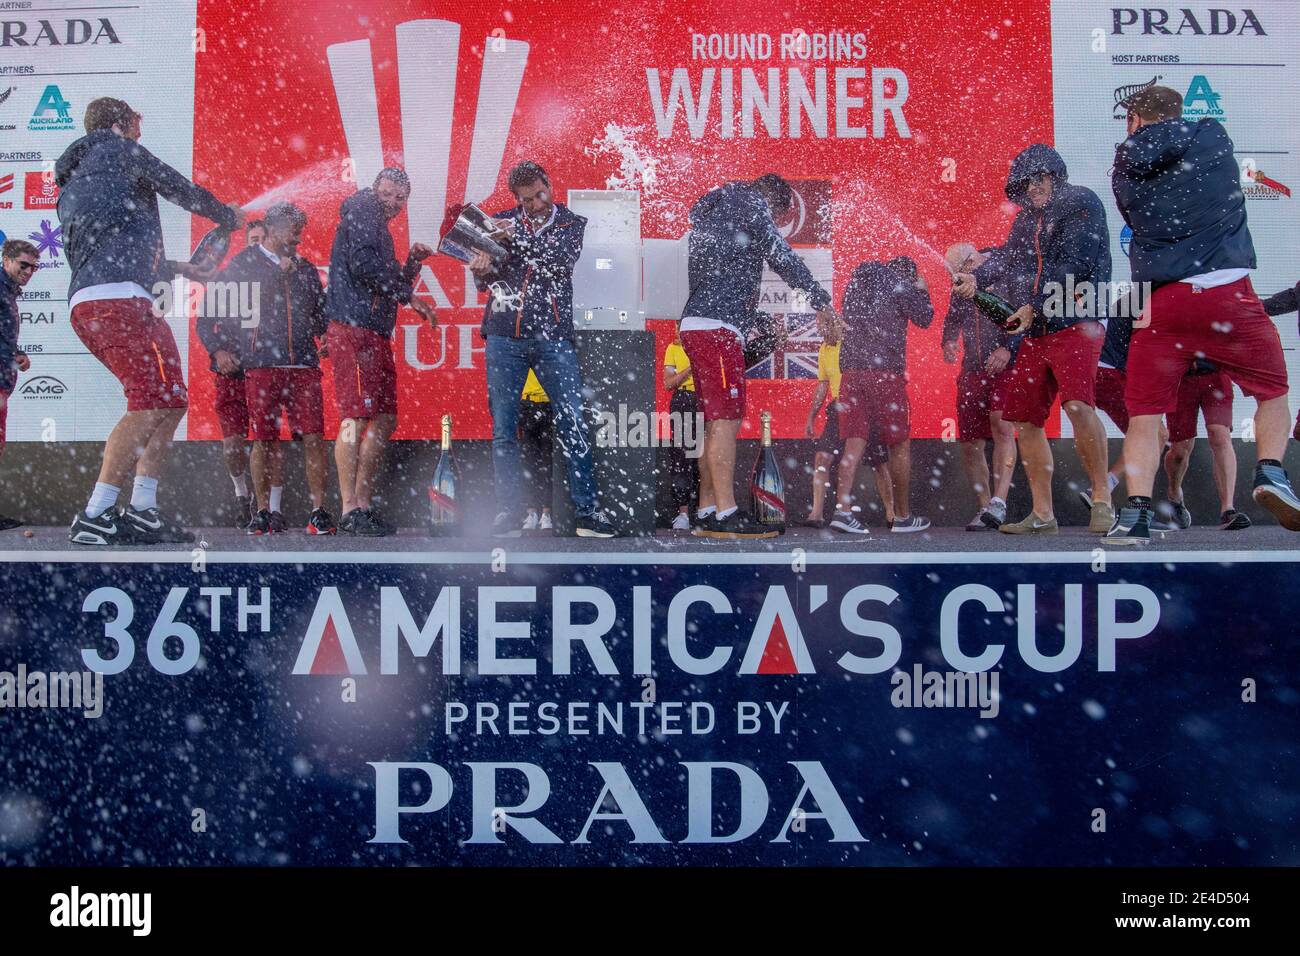 Auckland, New Zealand. 23rd Jan, 2021. INEOS Team UK Team celebrate after winning the Round Robin section of the Prada Cup. Saturday 23rd of Jan 2021. Copyright Credit: Chris Cameron/Alamy Live News Stock Photo